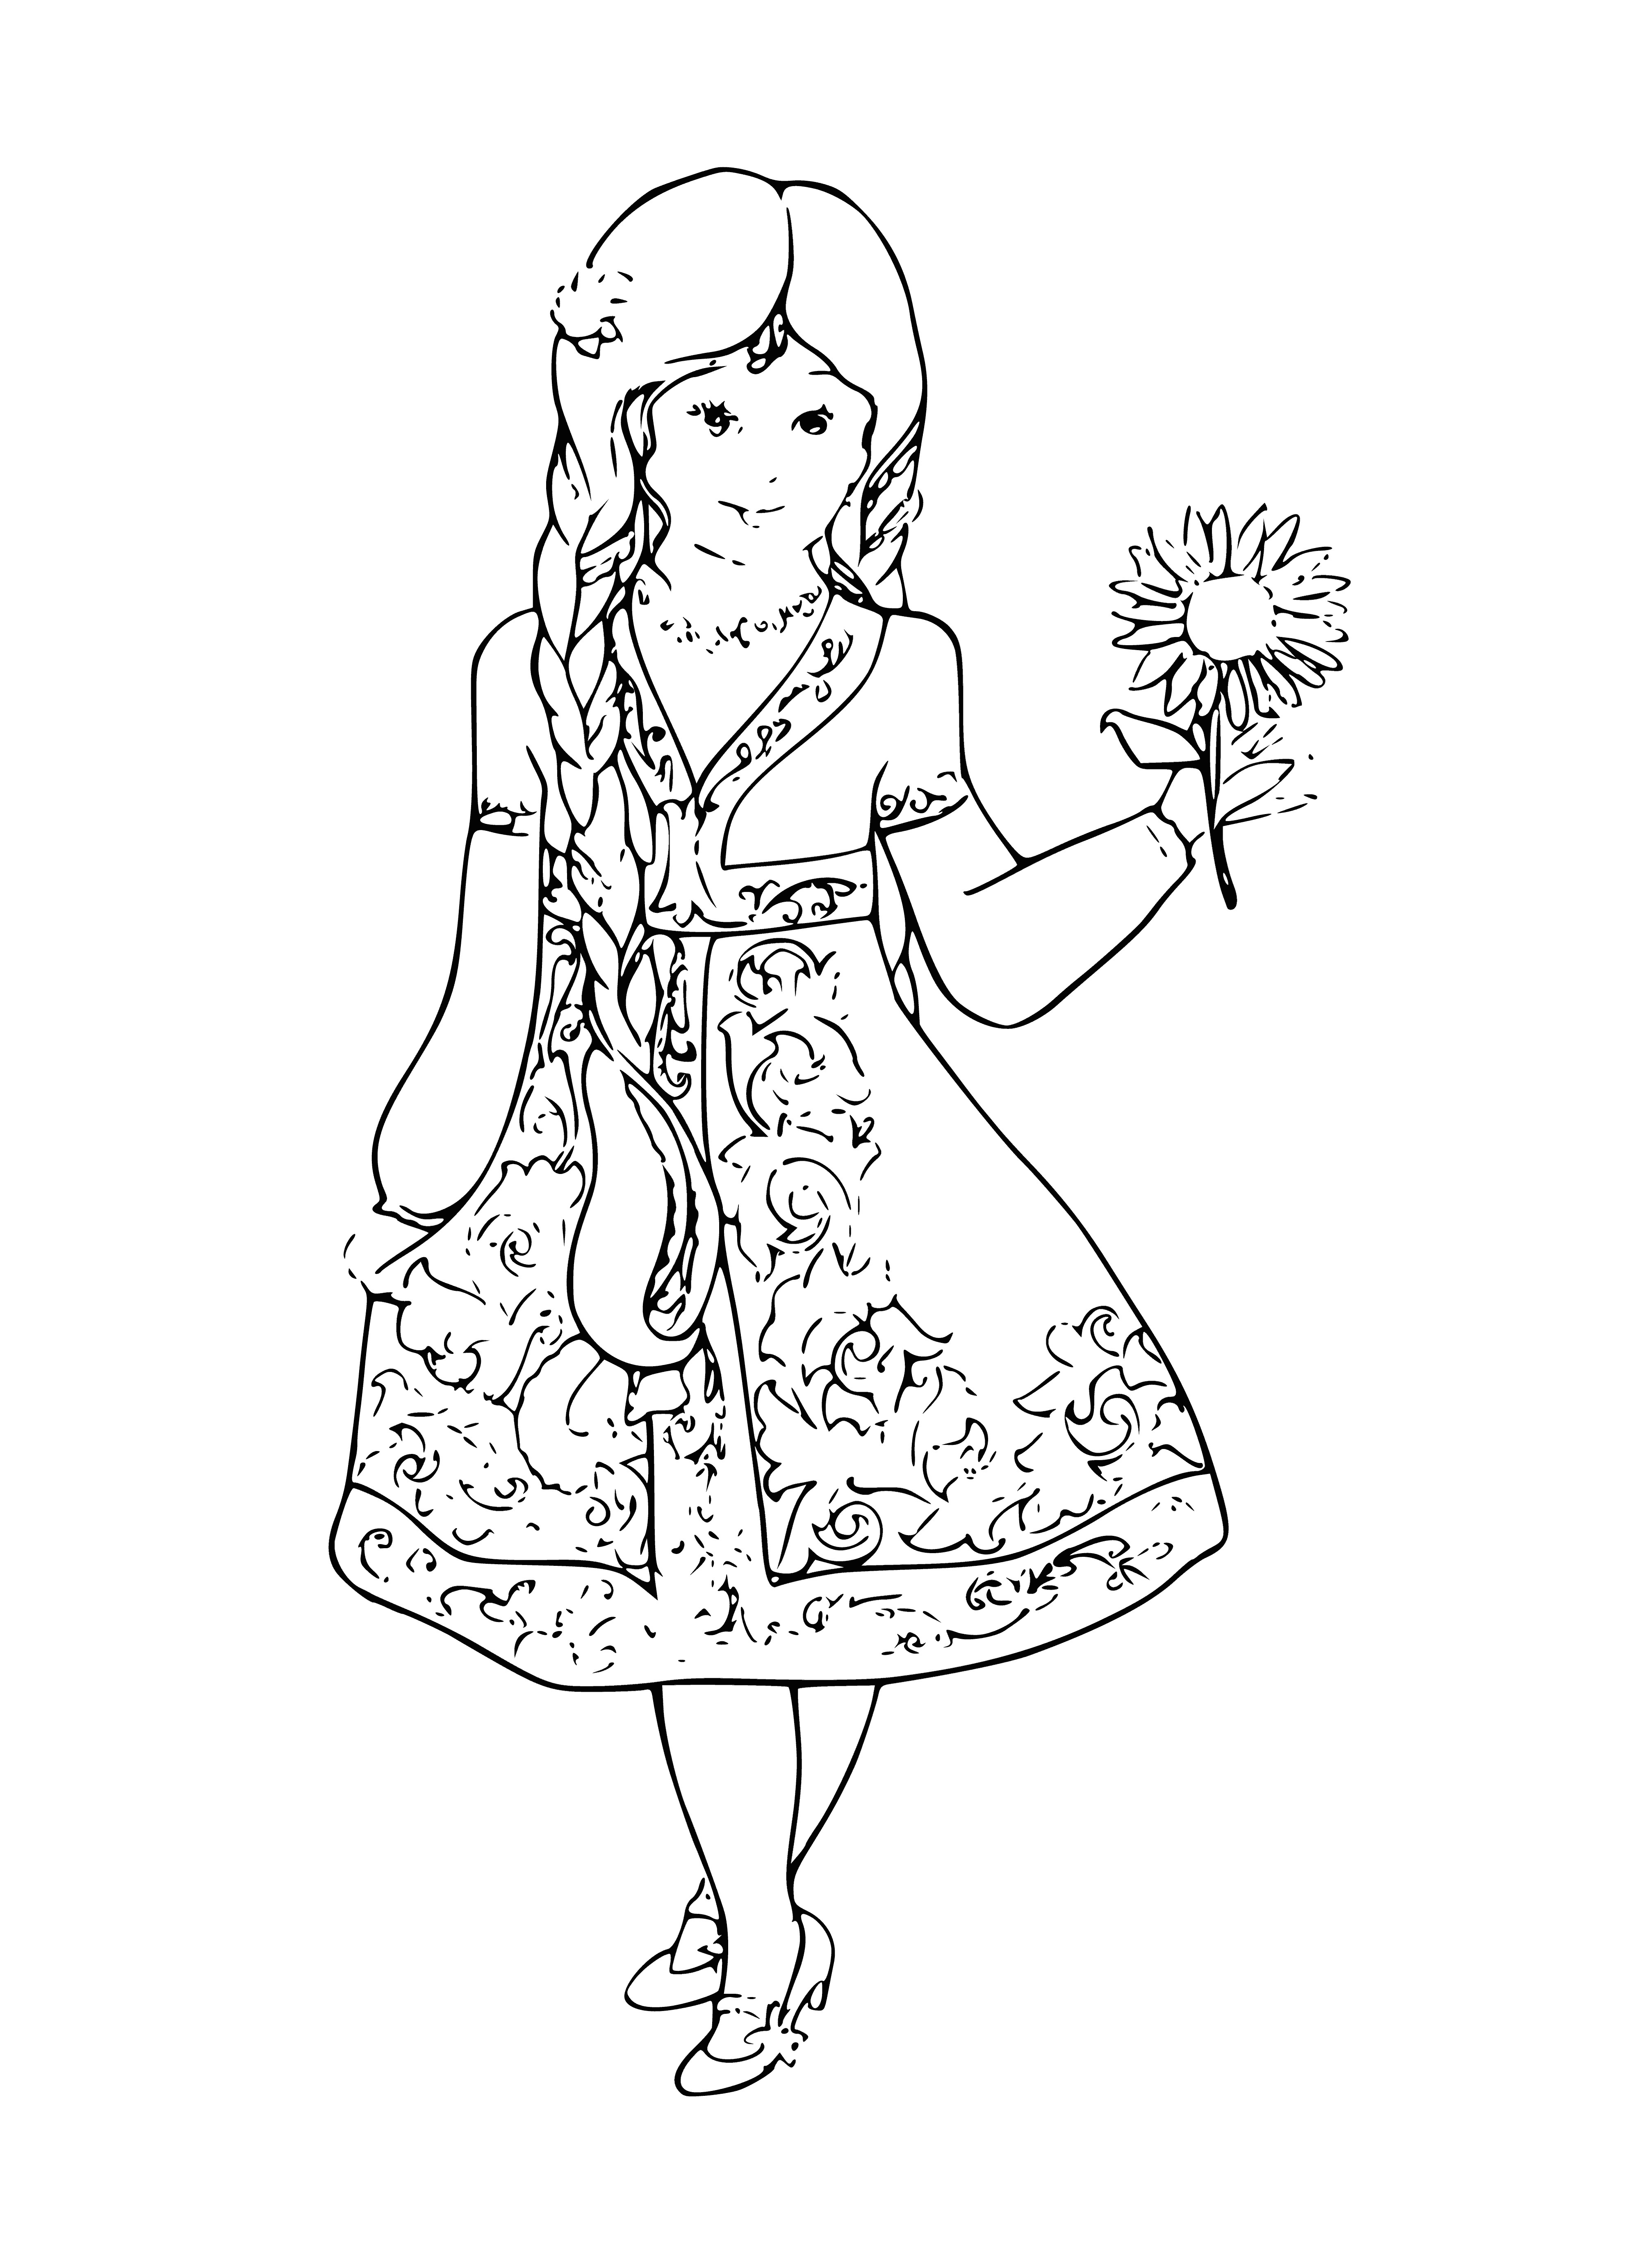 coloring page: Woman in patterned dress views a painting in a room. #art #painting